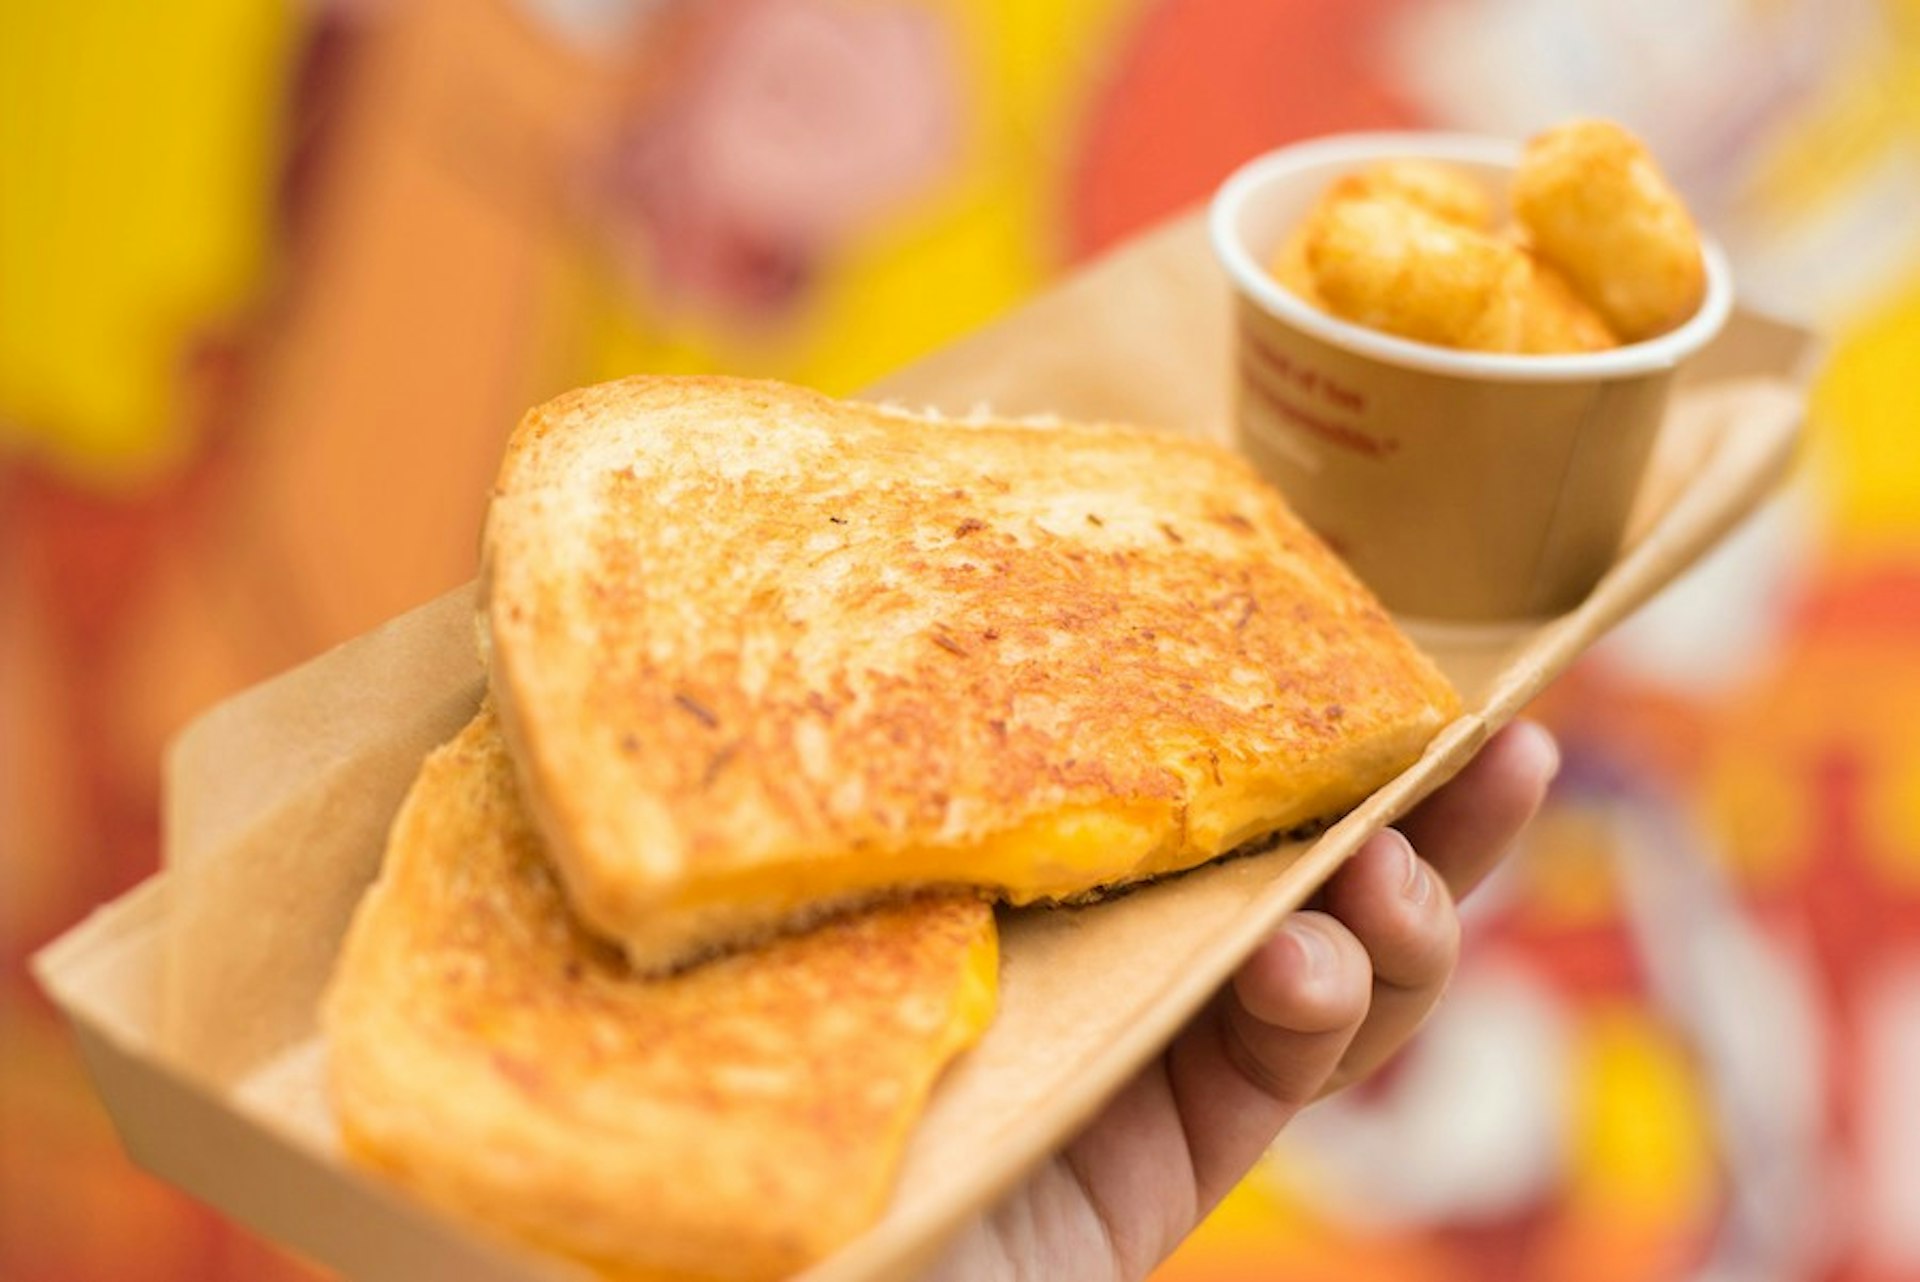 The Disney grilled cheese sandwich on a plate